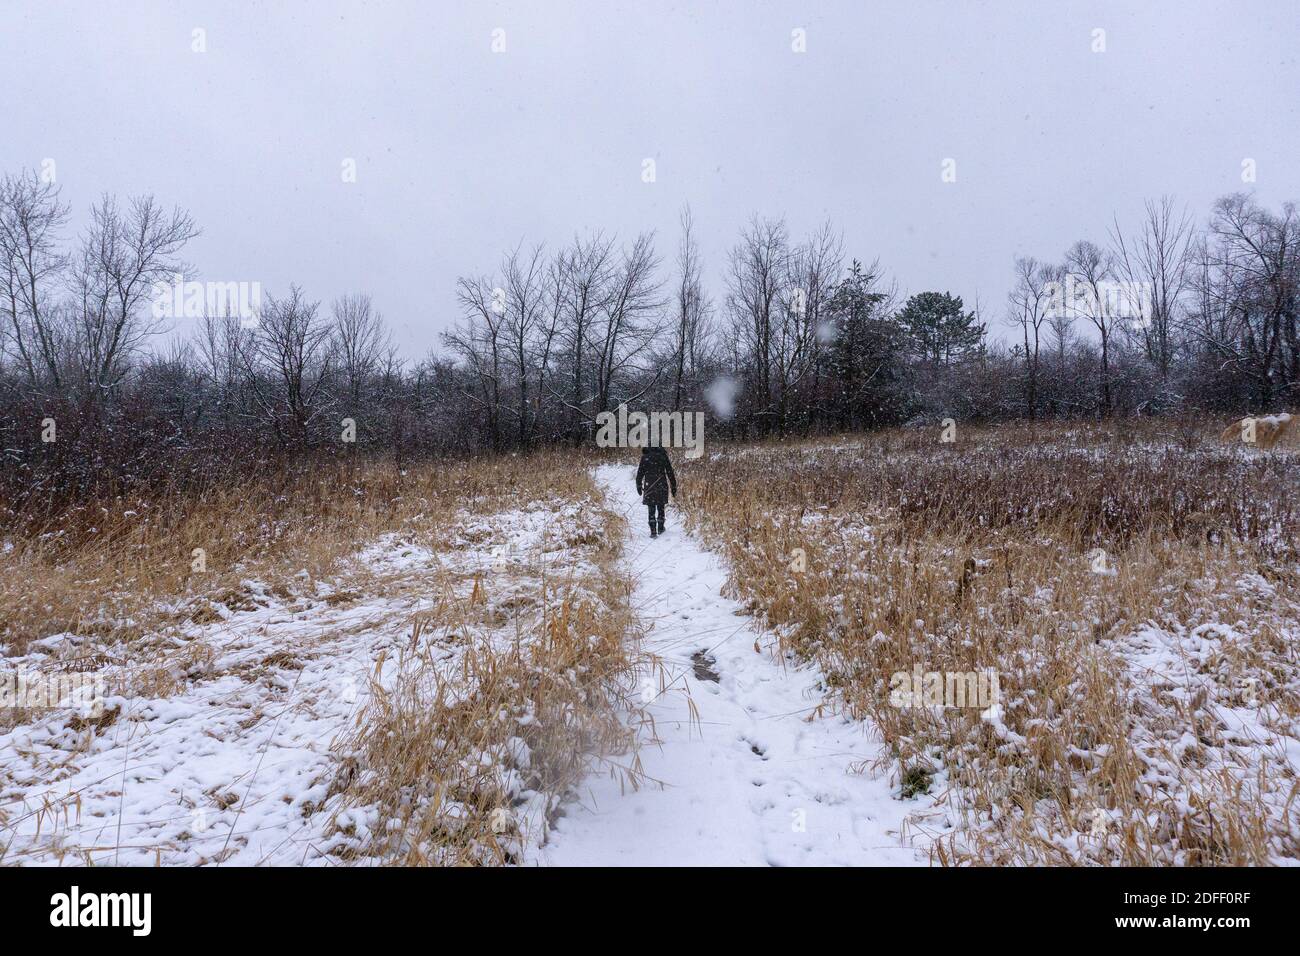 Woman walking away from camera down snowy path Stock Photo